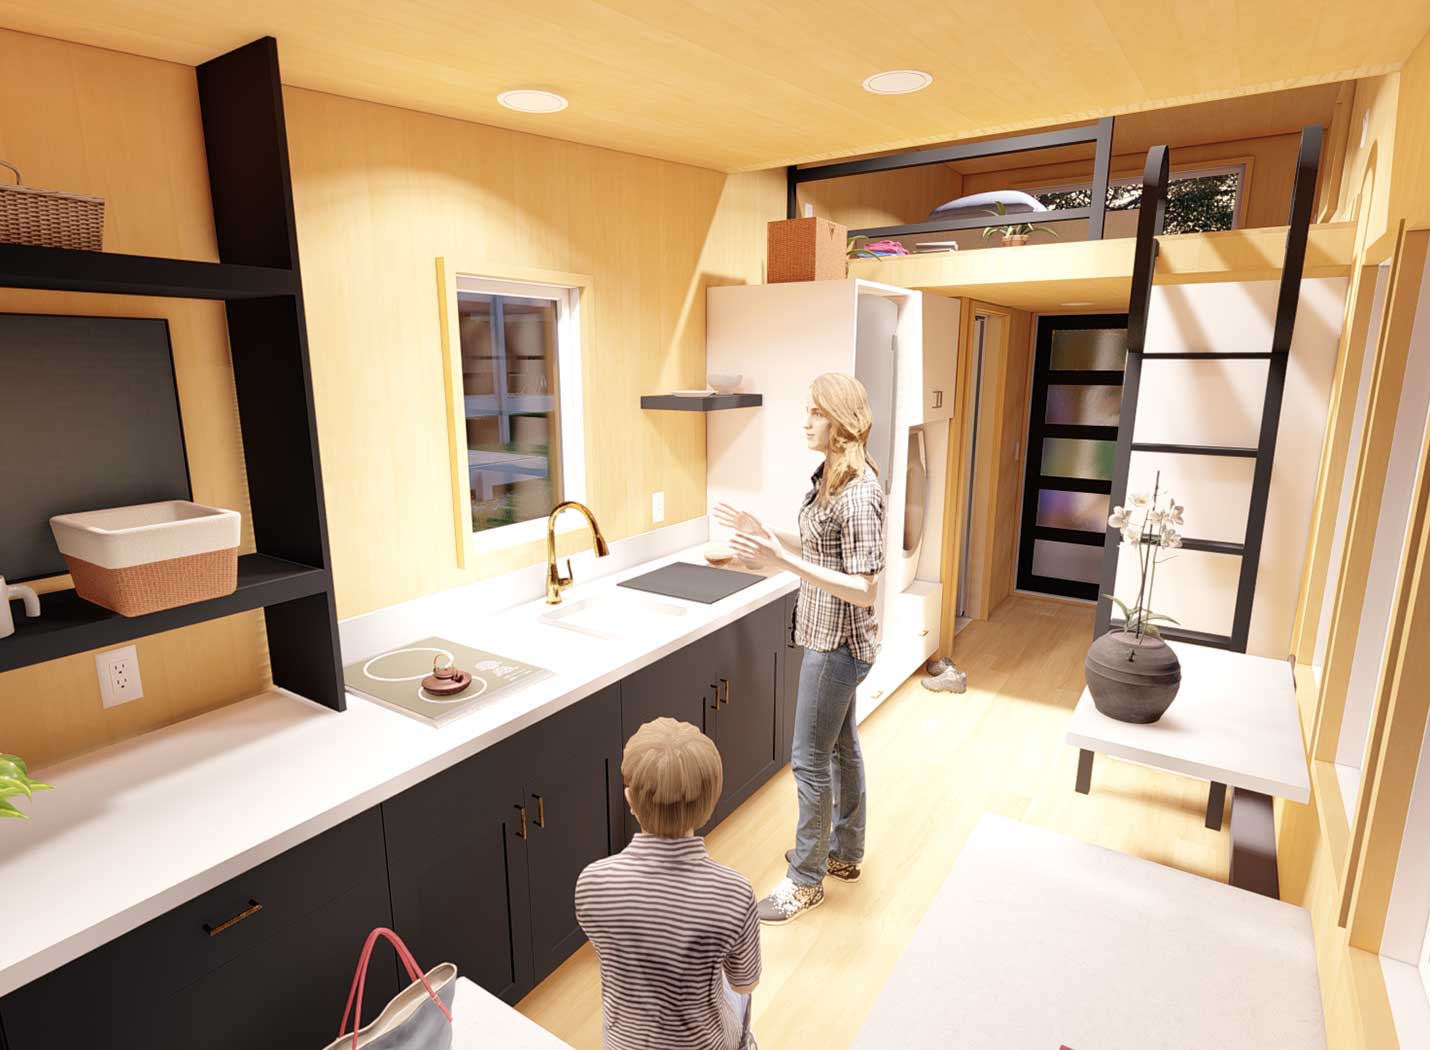 3D model of the interior of the Heirloom X, showing a family in the kitchen and a ladder to the loft